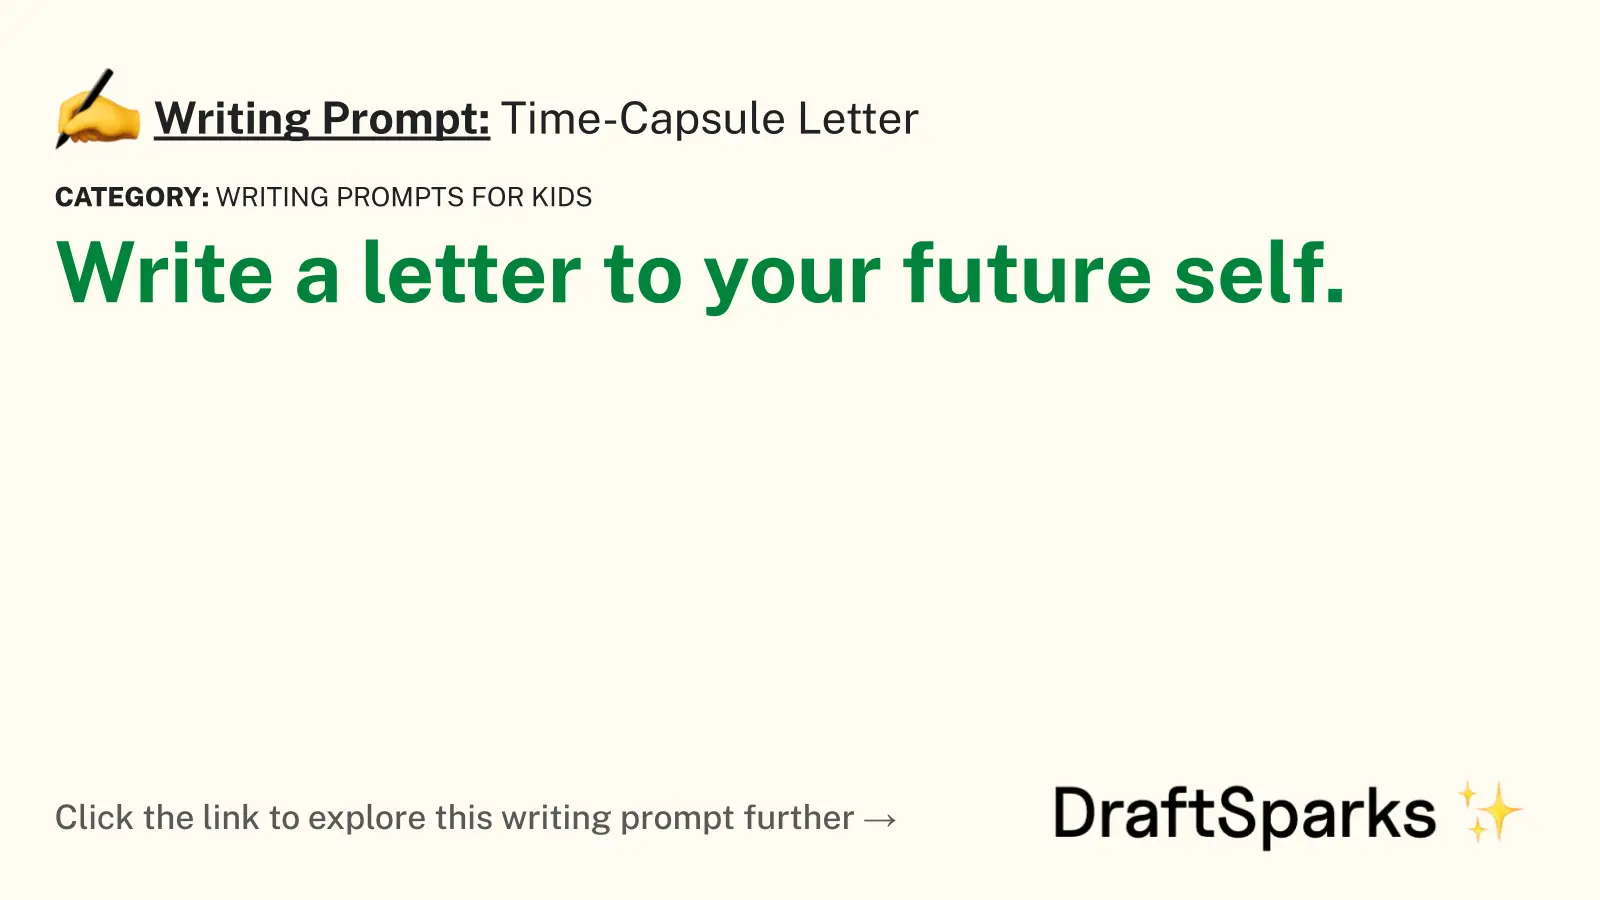 Time-Capsule Letter